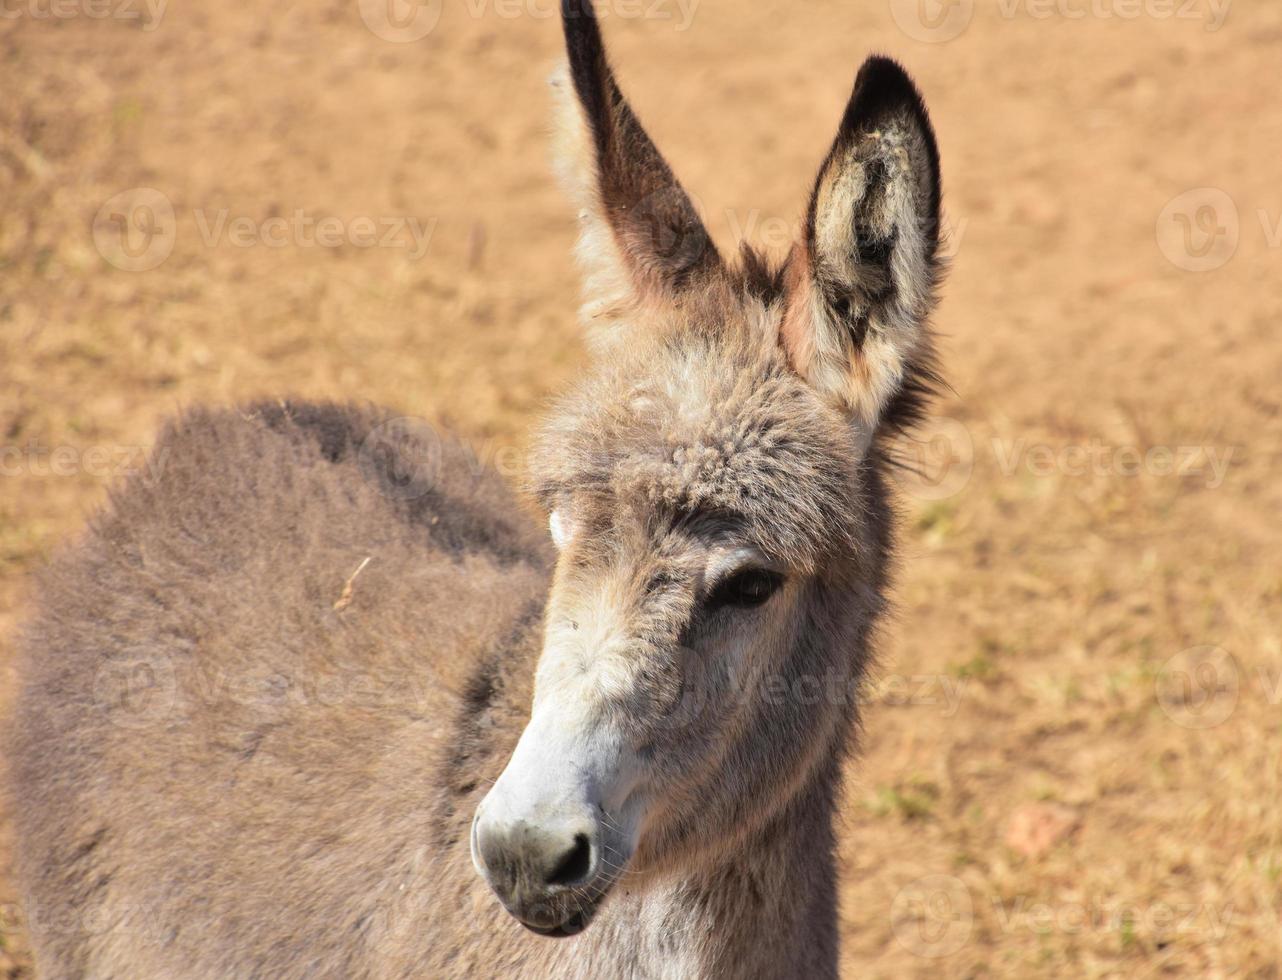 Adorable Baby Wild Donkey with Fluffy Ears photo